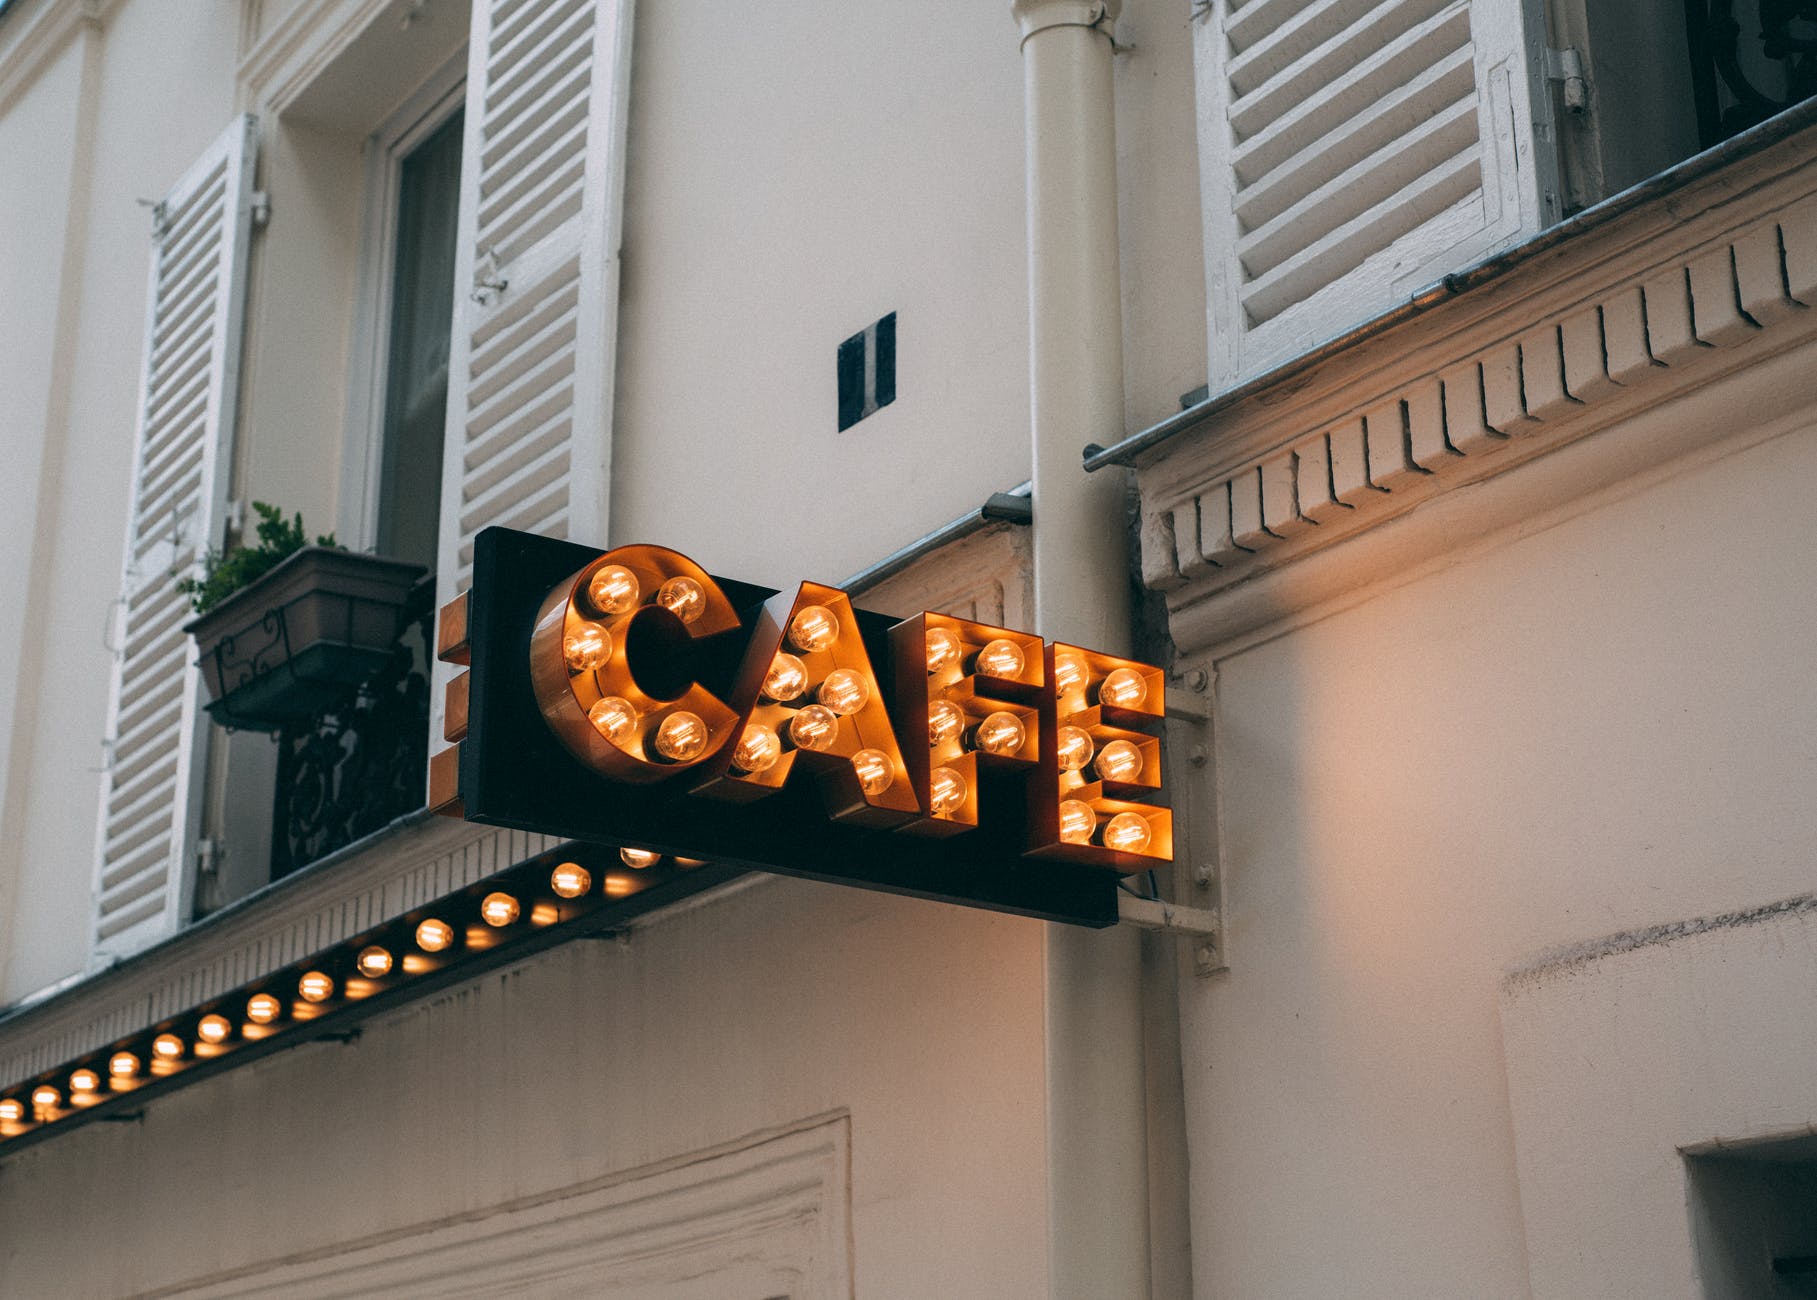 There was only one man inside the café. | Source: Pexels